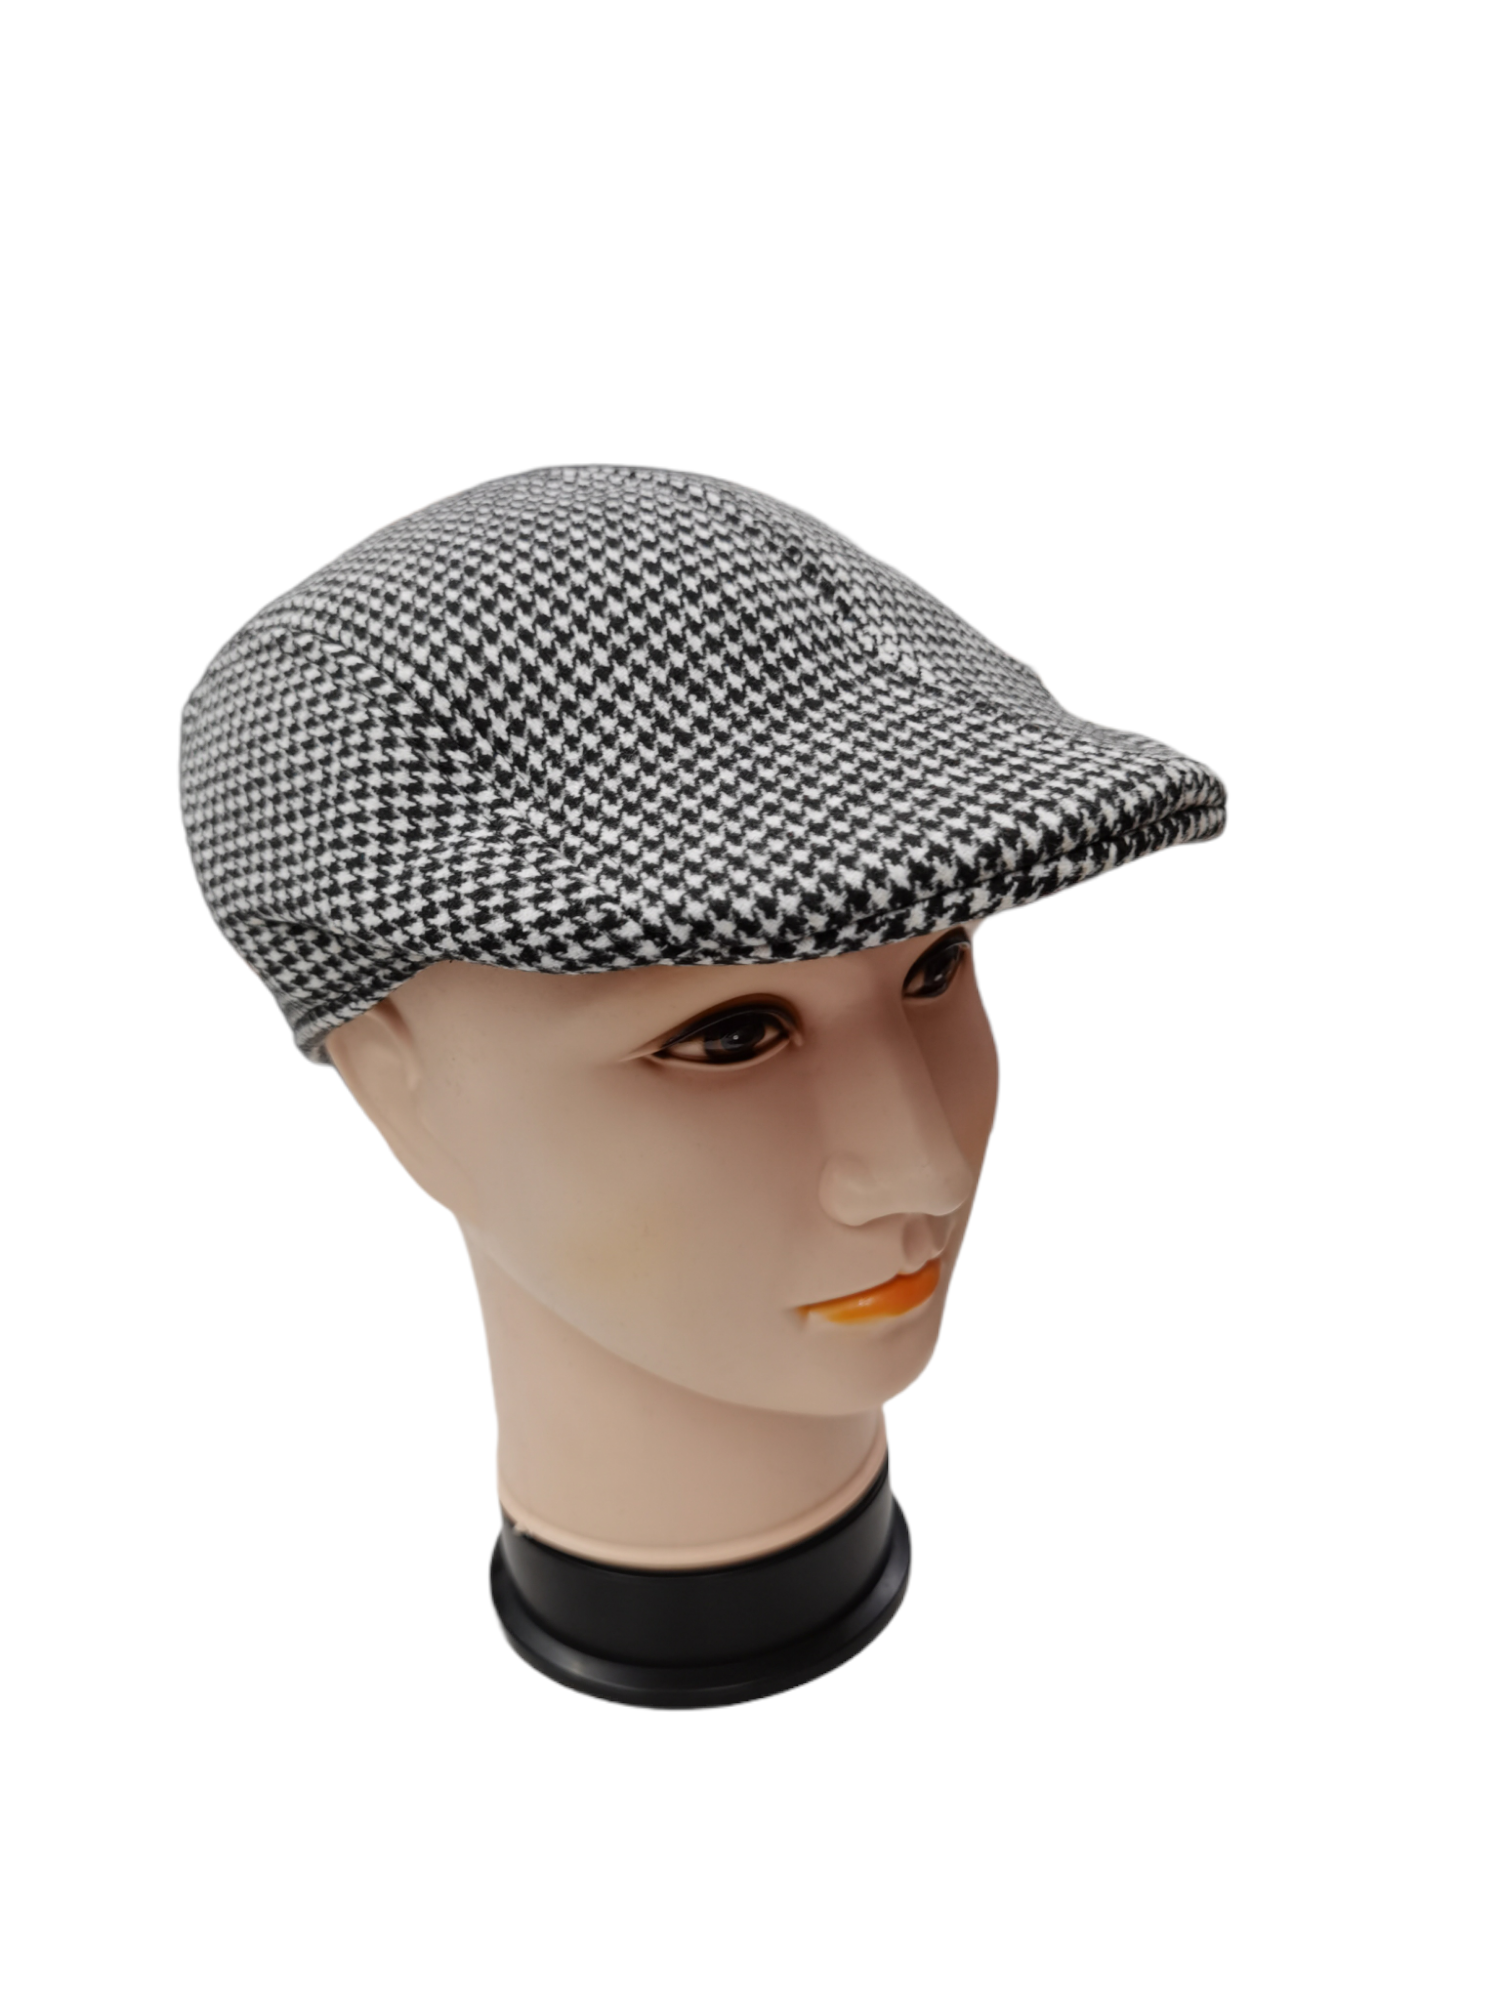 Men's beret with houndstooth pattern (x12)